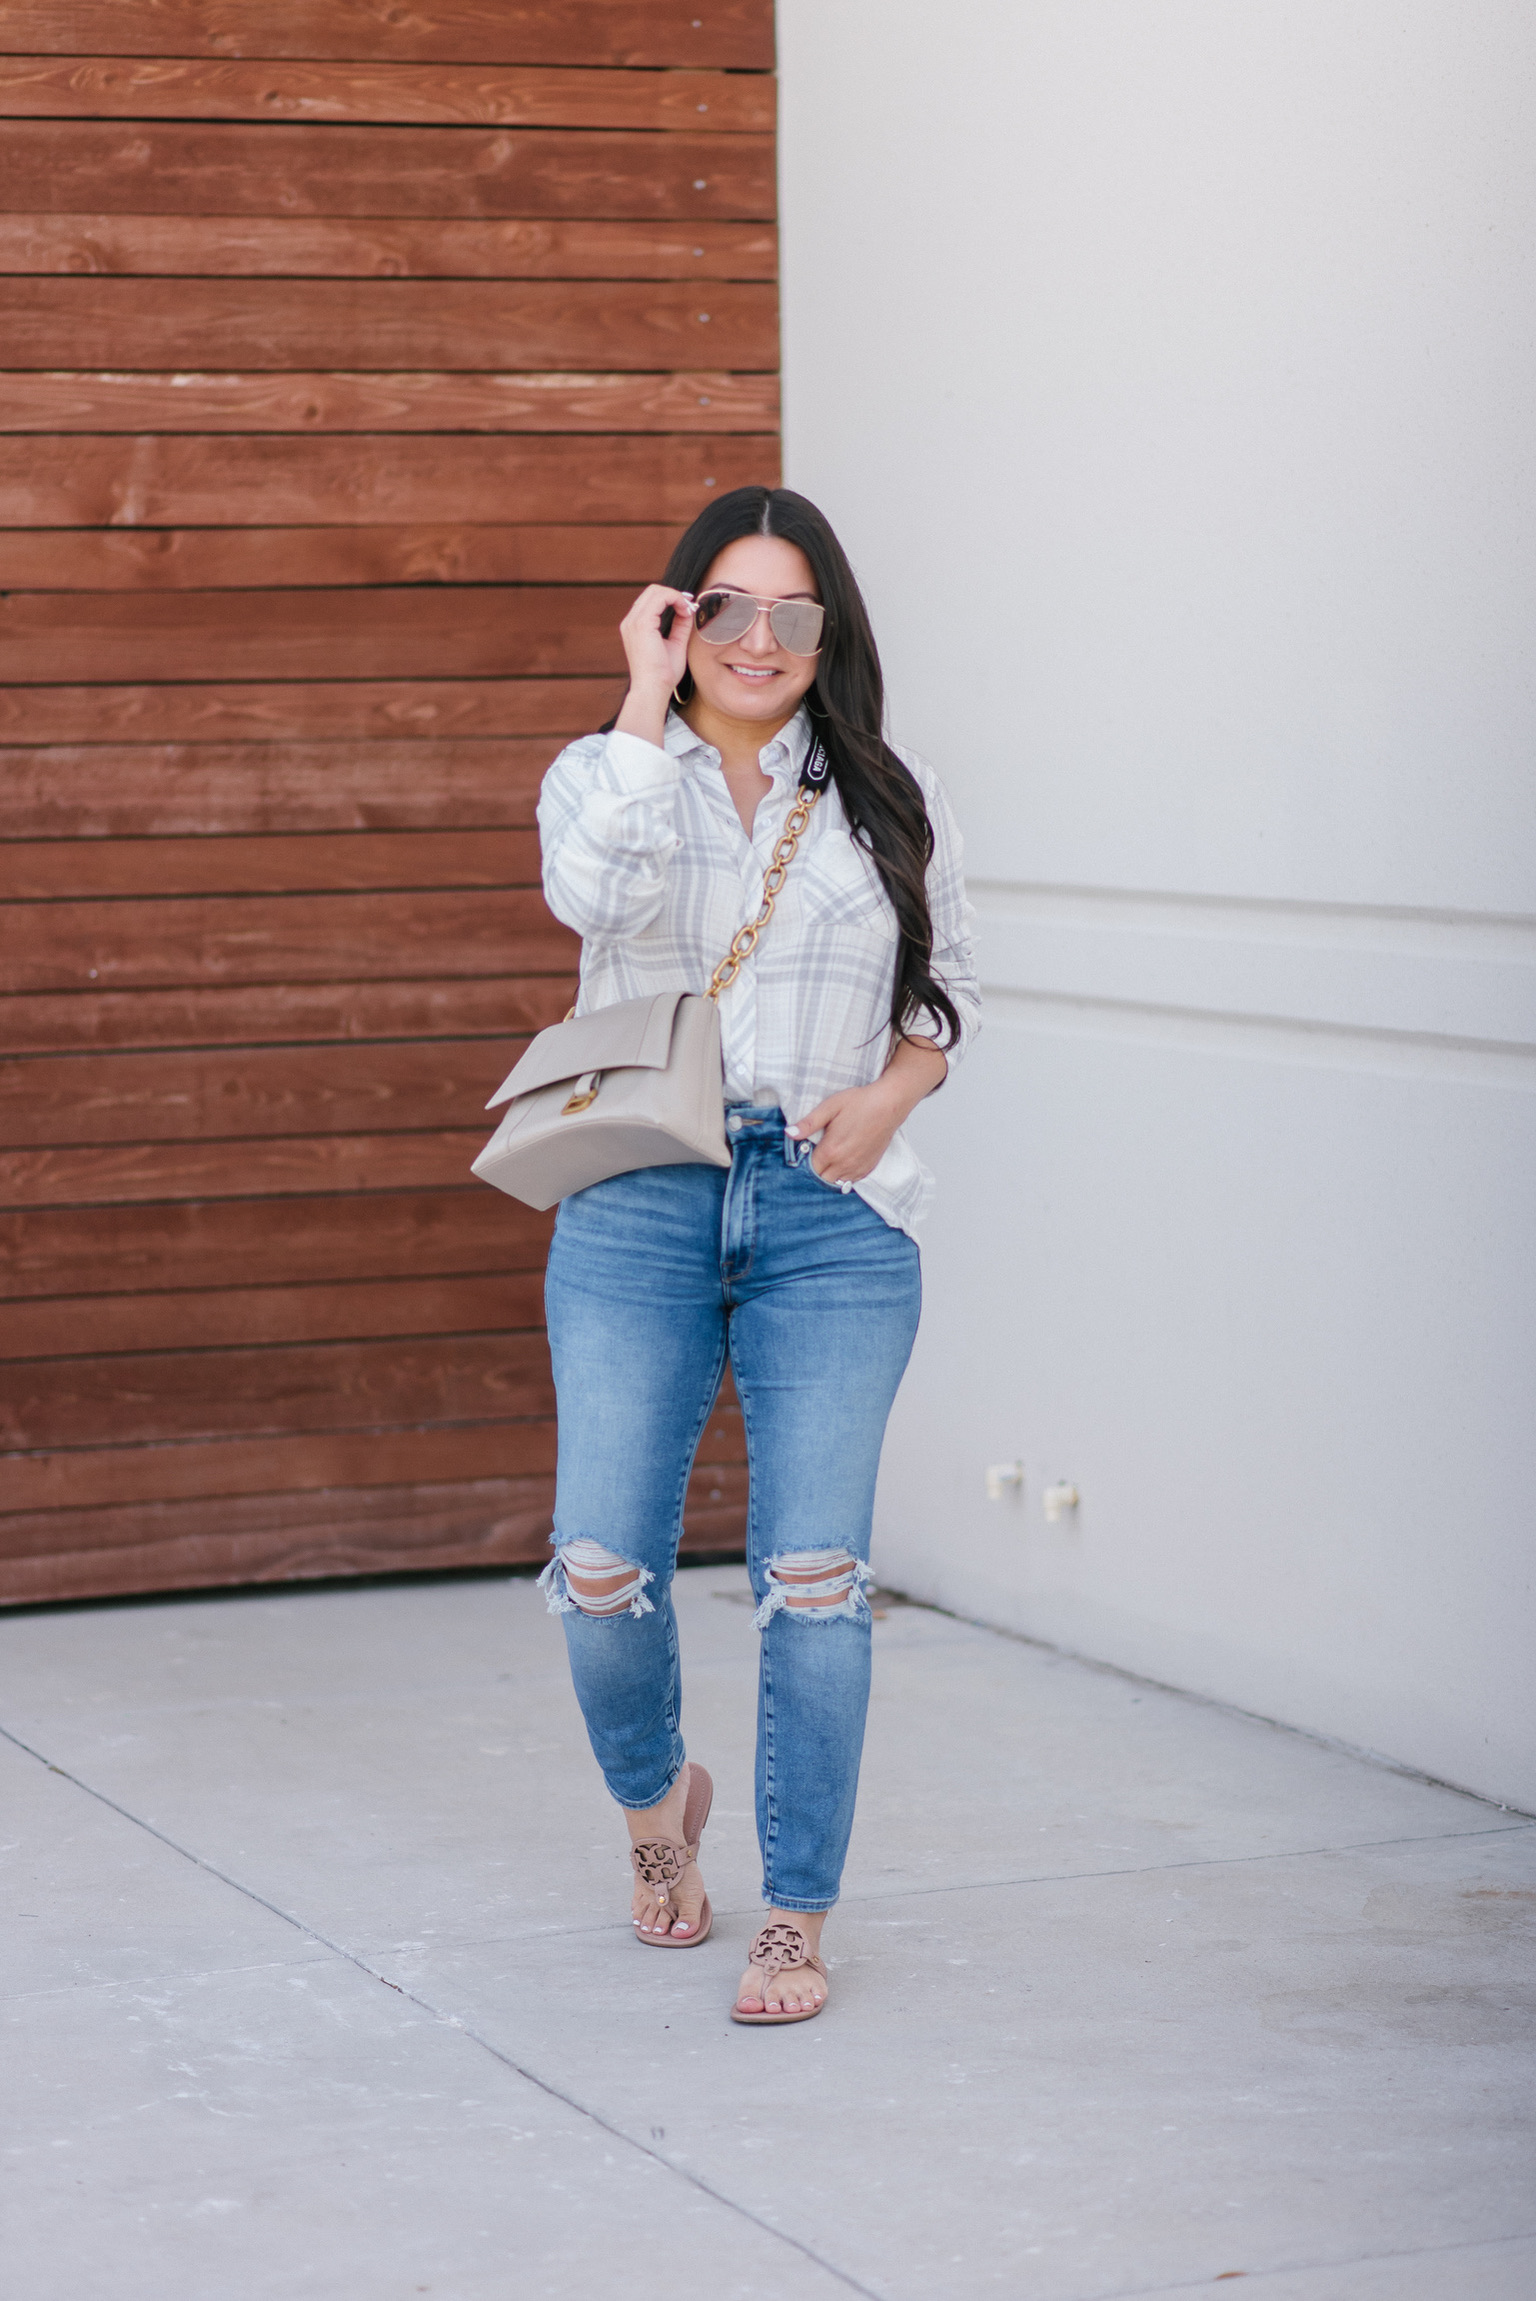 Houston top fashion and lifestyle blogger LuxMommy styles Nordstrom ripped jeans, button up top, and Balenciaga bag